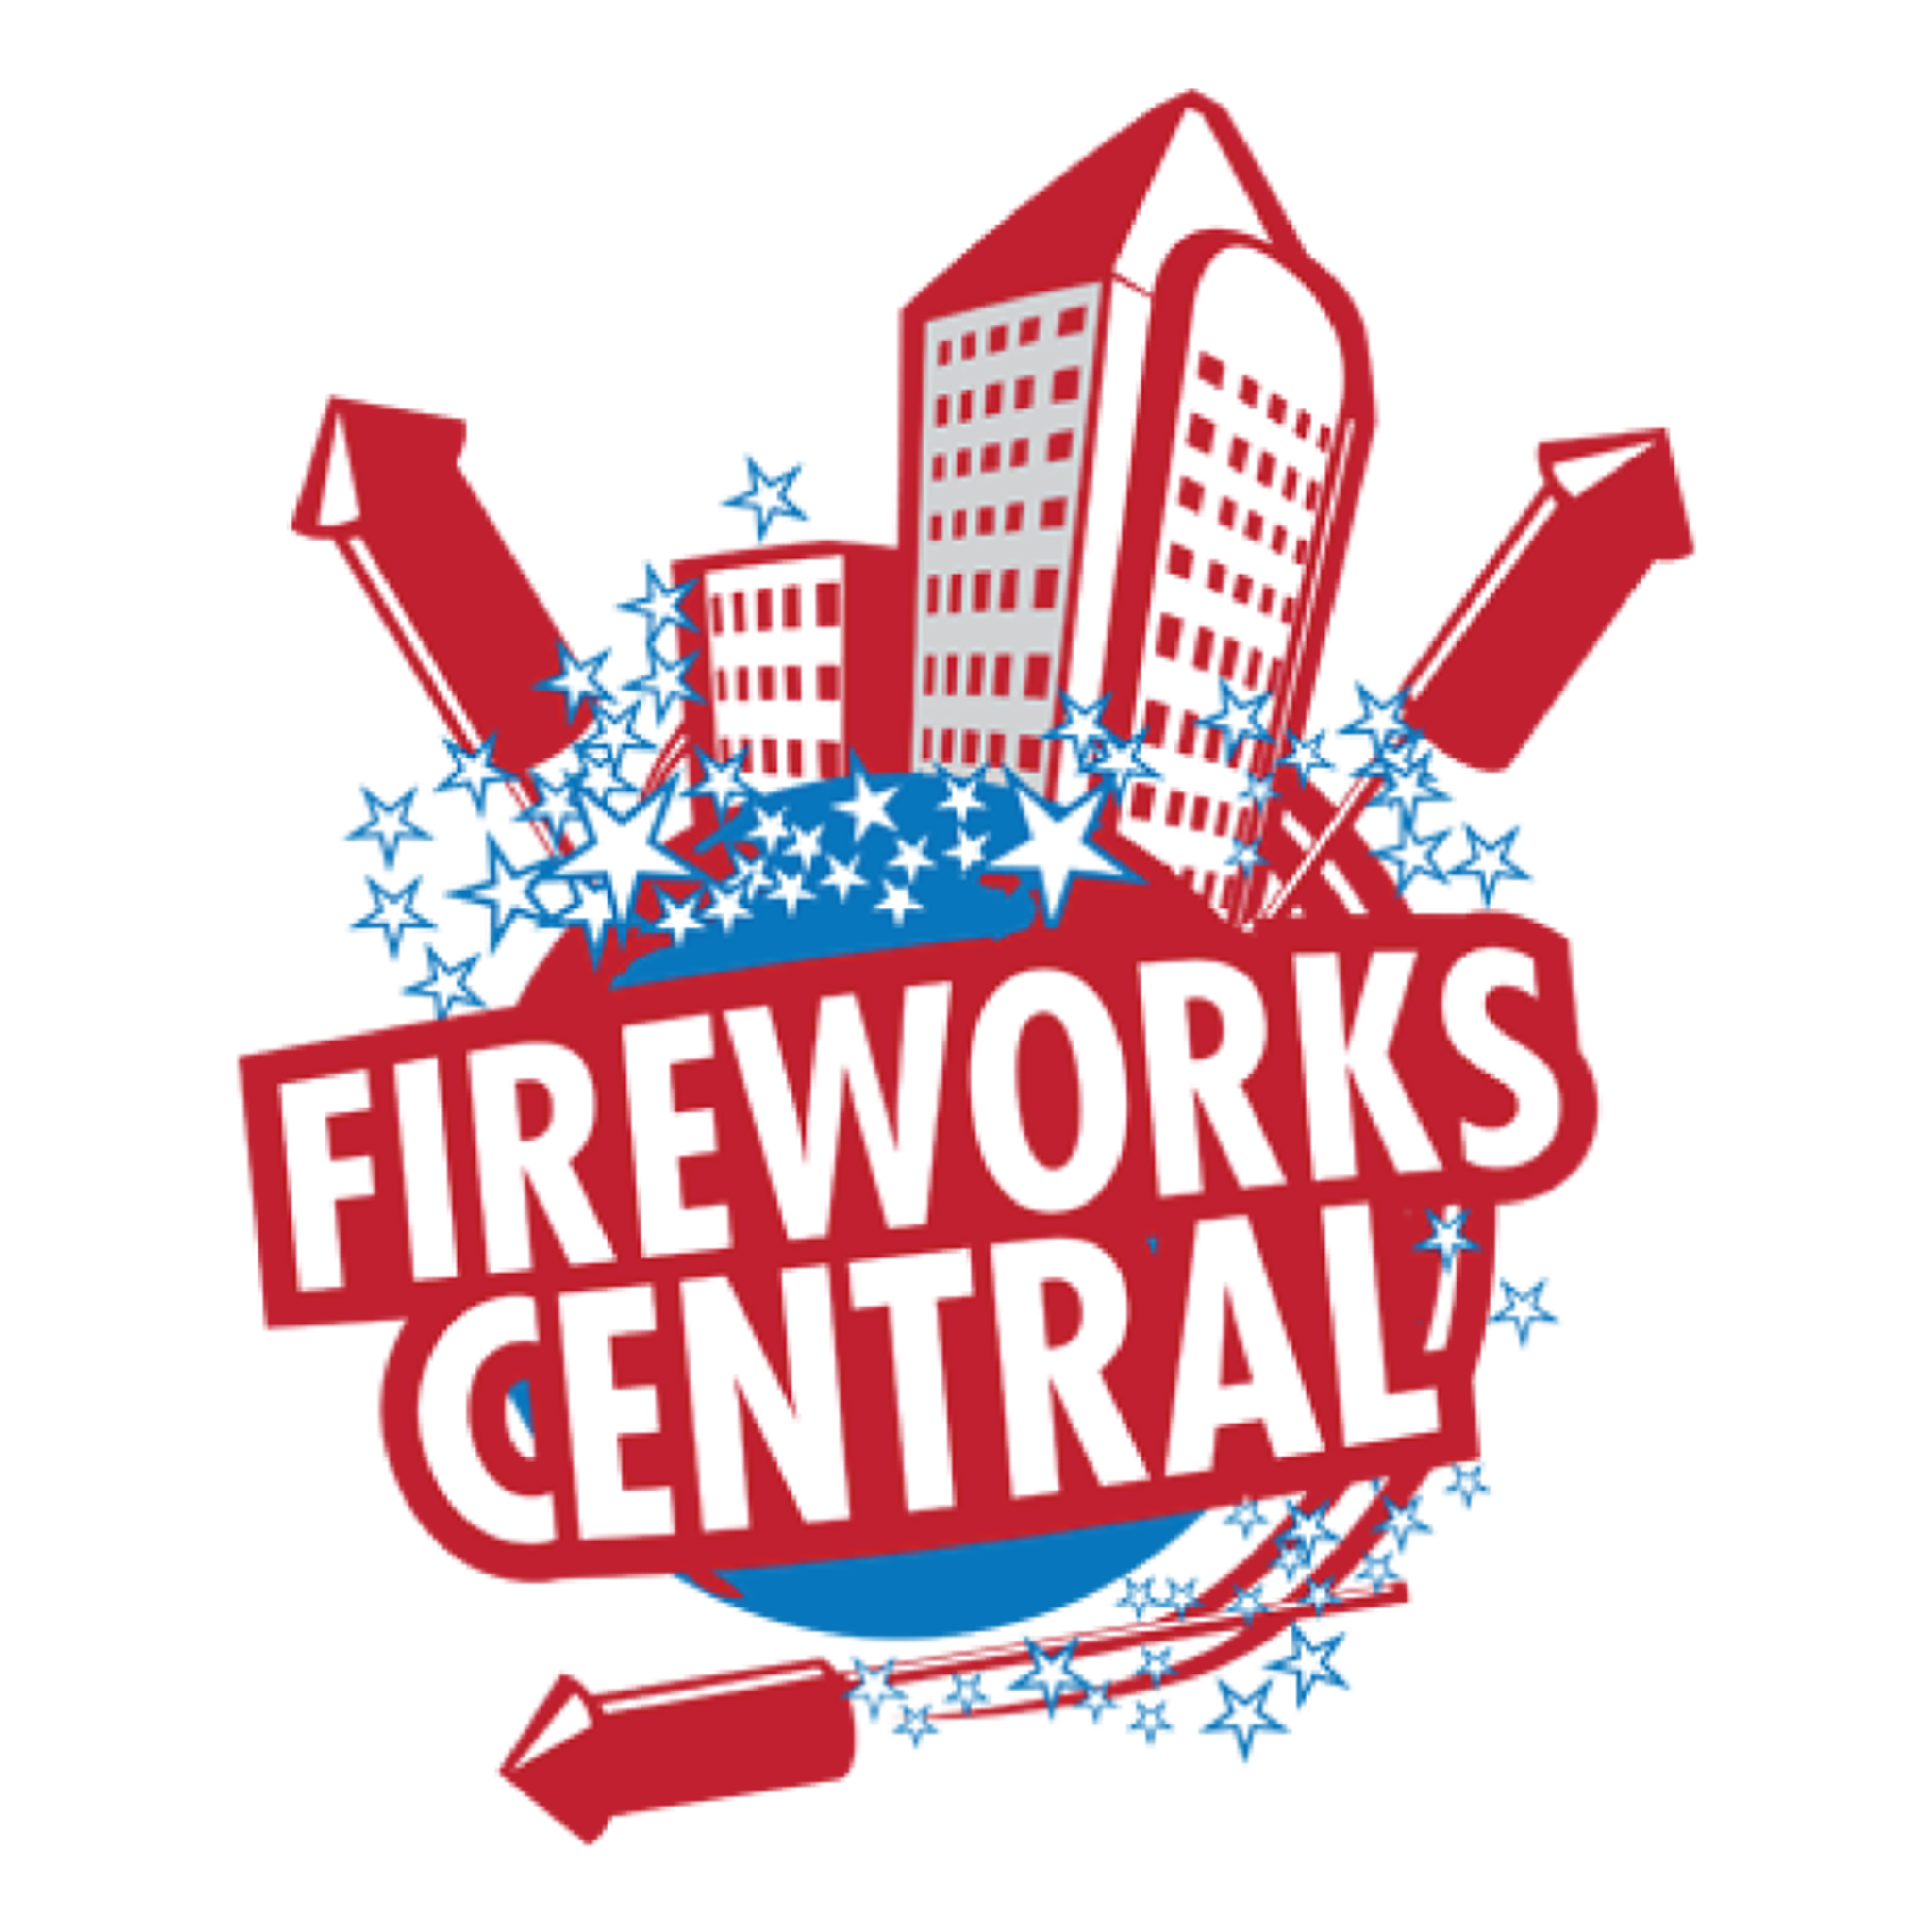 clipart fireworks roman candle